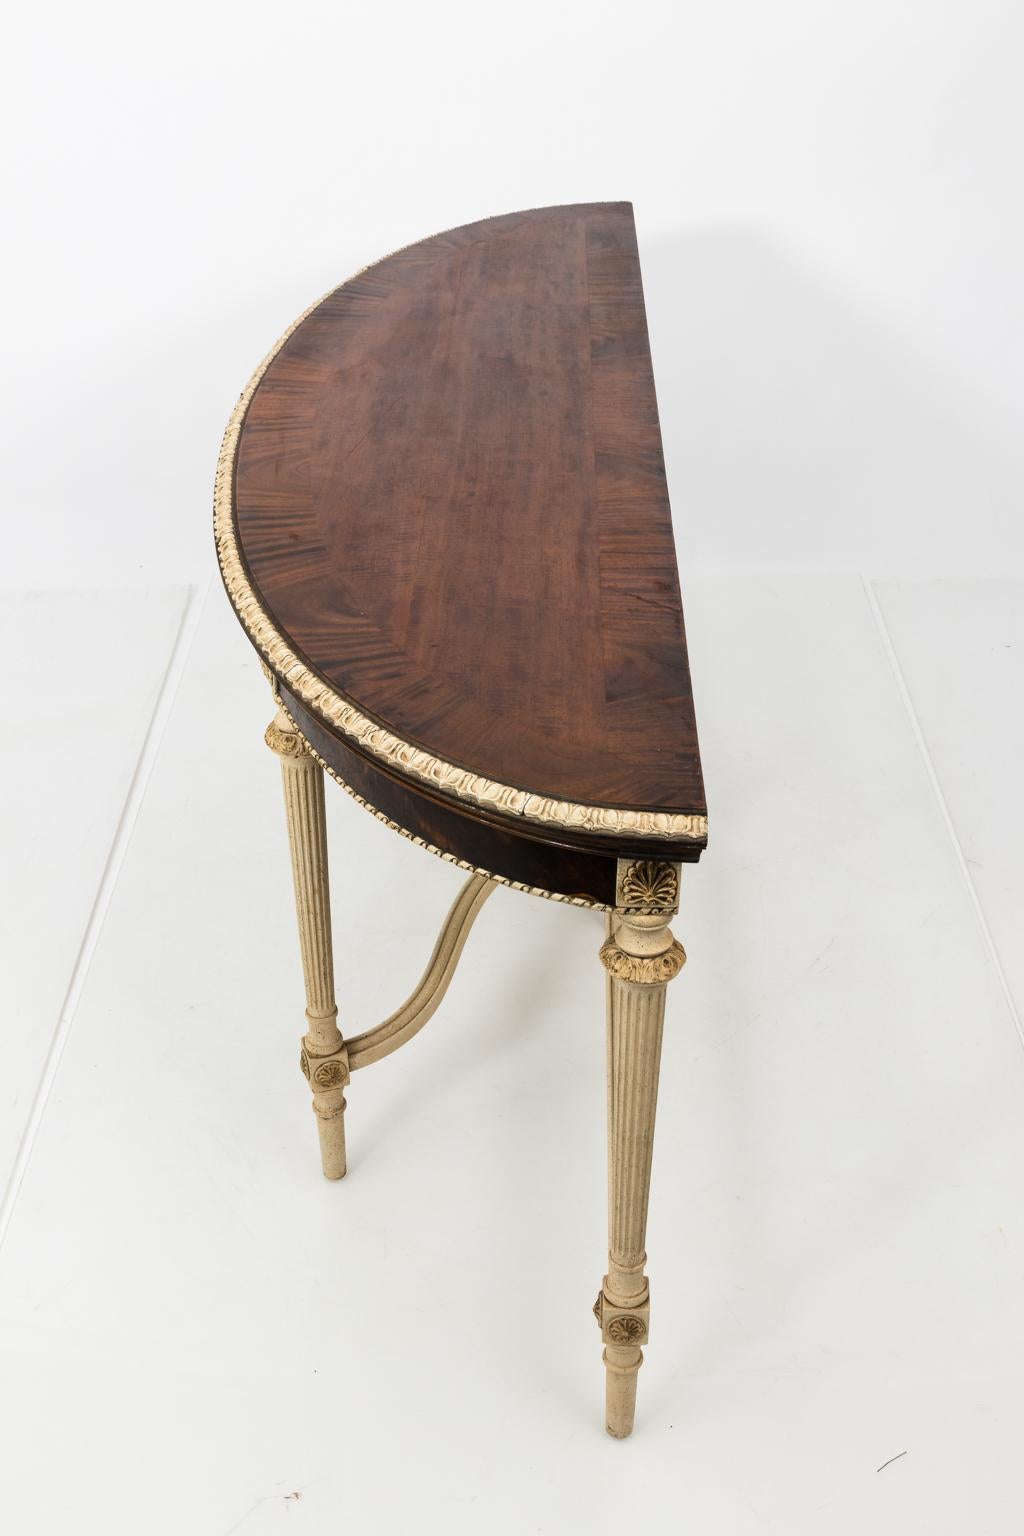 Louis XVI style painted demilune table with two drawers and a walnut top, circa 1930s-1940s. The table also features carved palmettes on the skirt with turned legs.